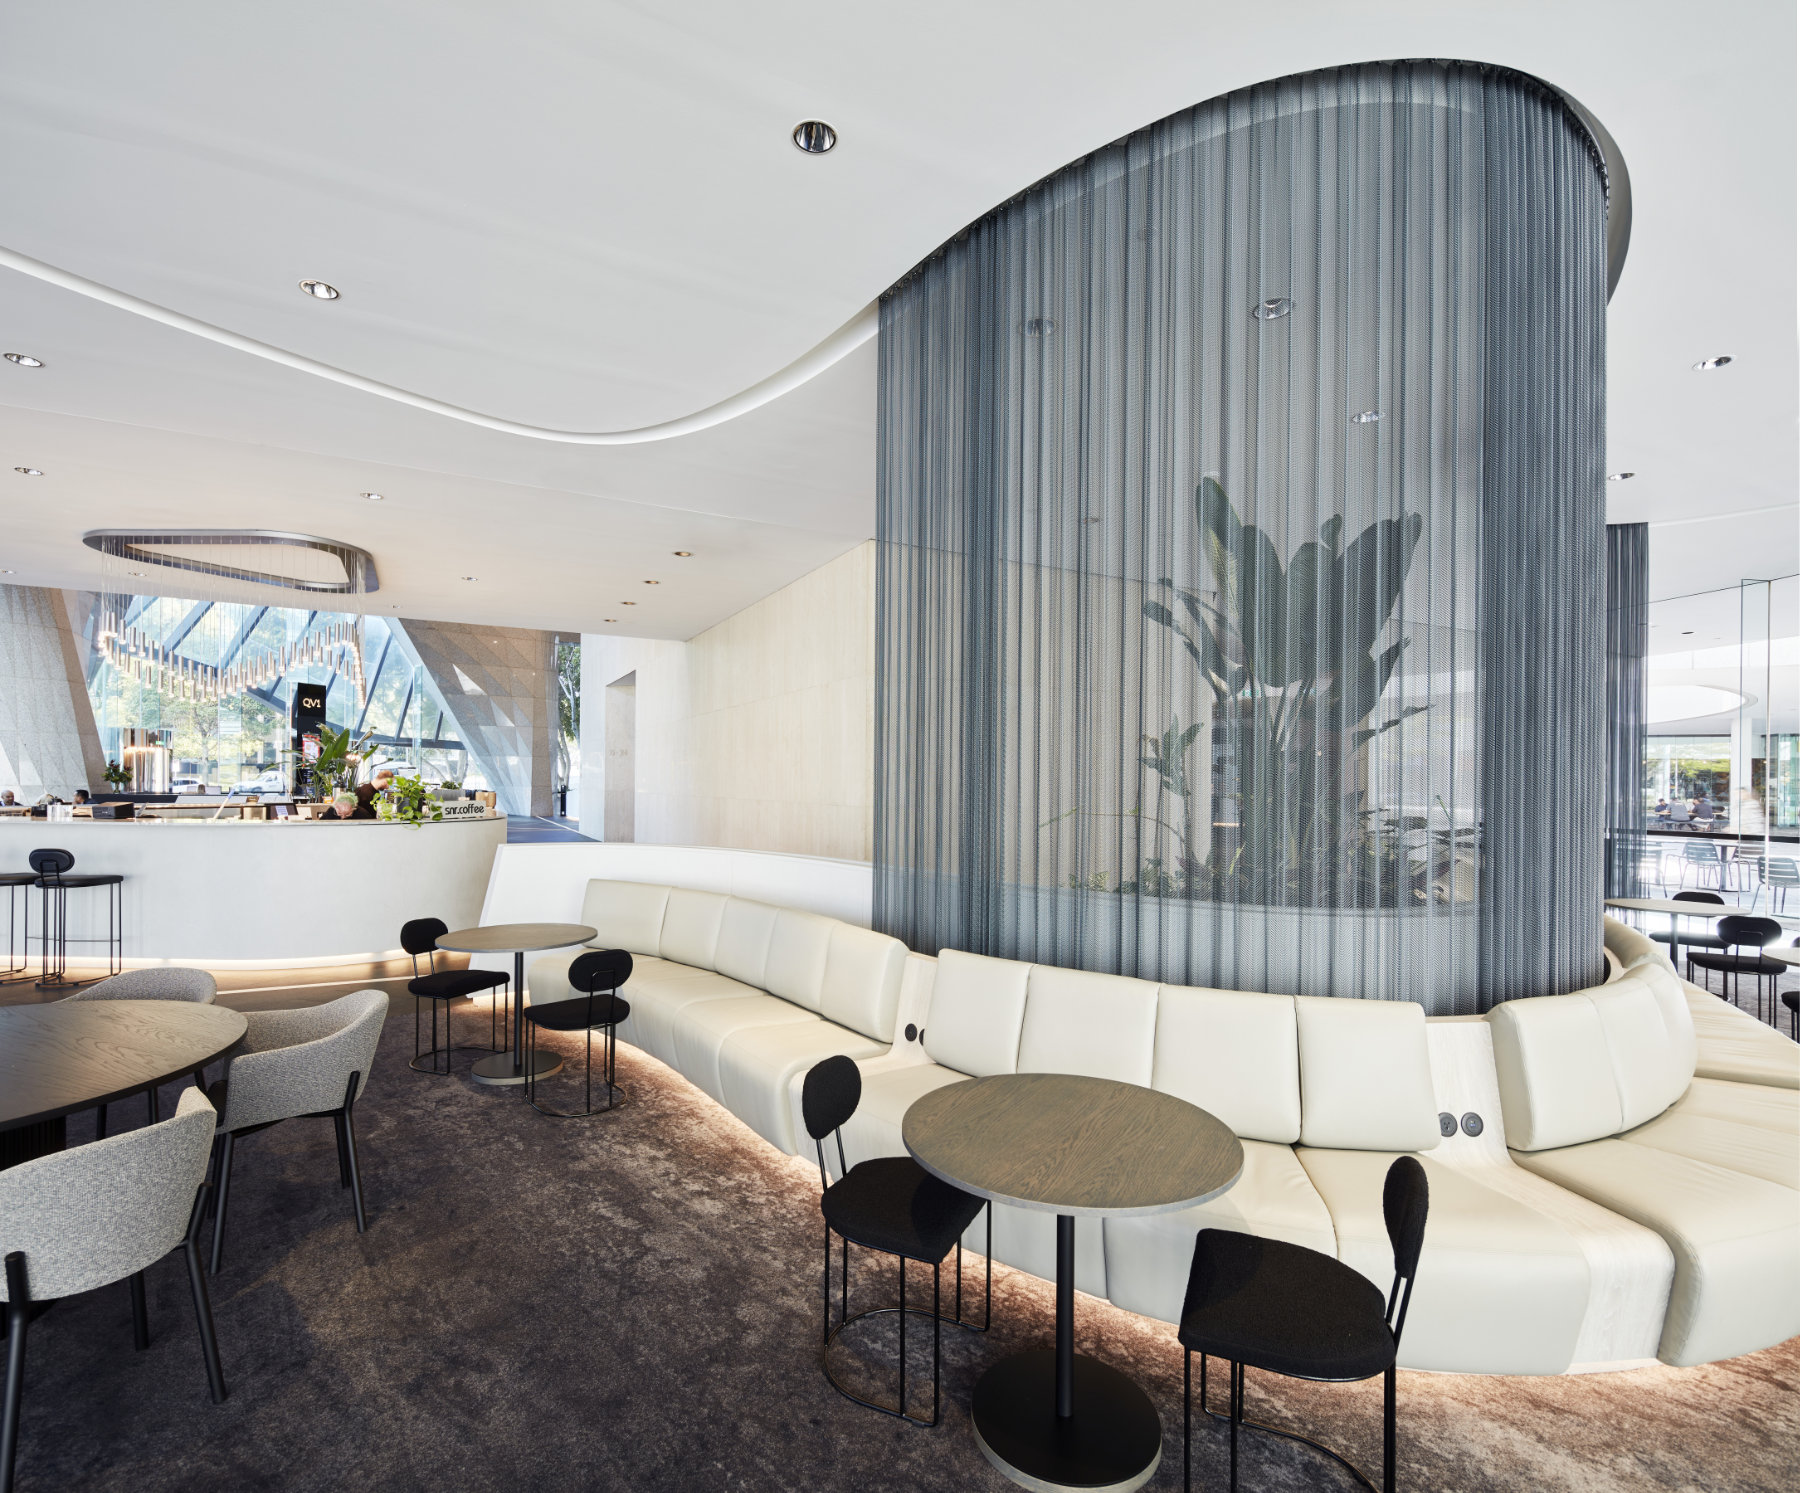 Fabricoil Interior Drapery, Metal Mesh Partition, Steel Coiled Wire Fabric in Gunmetal Black with Steel Secura Track Attachment System at QV1 Lobby, Australia - Plus Architecture